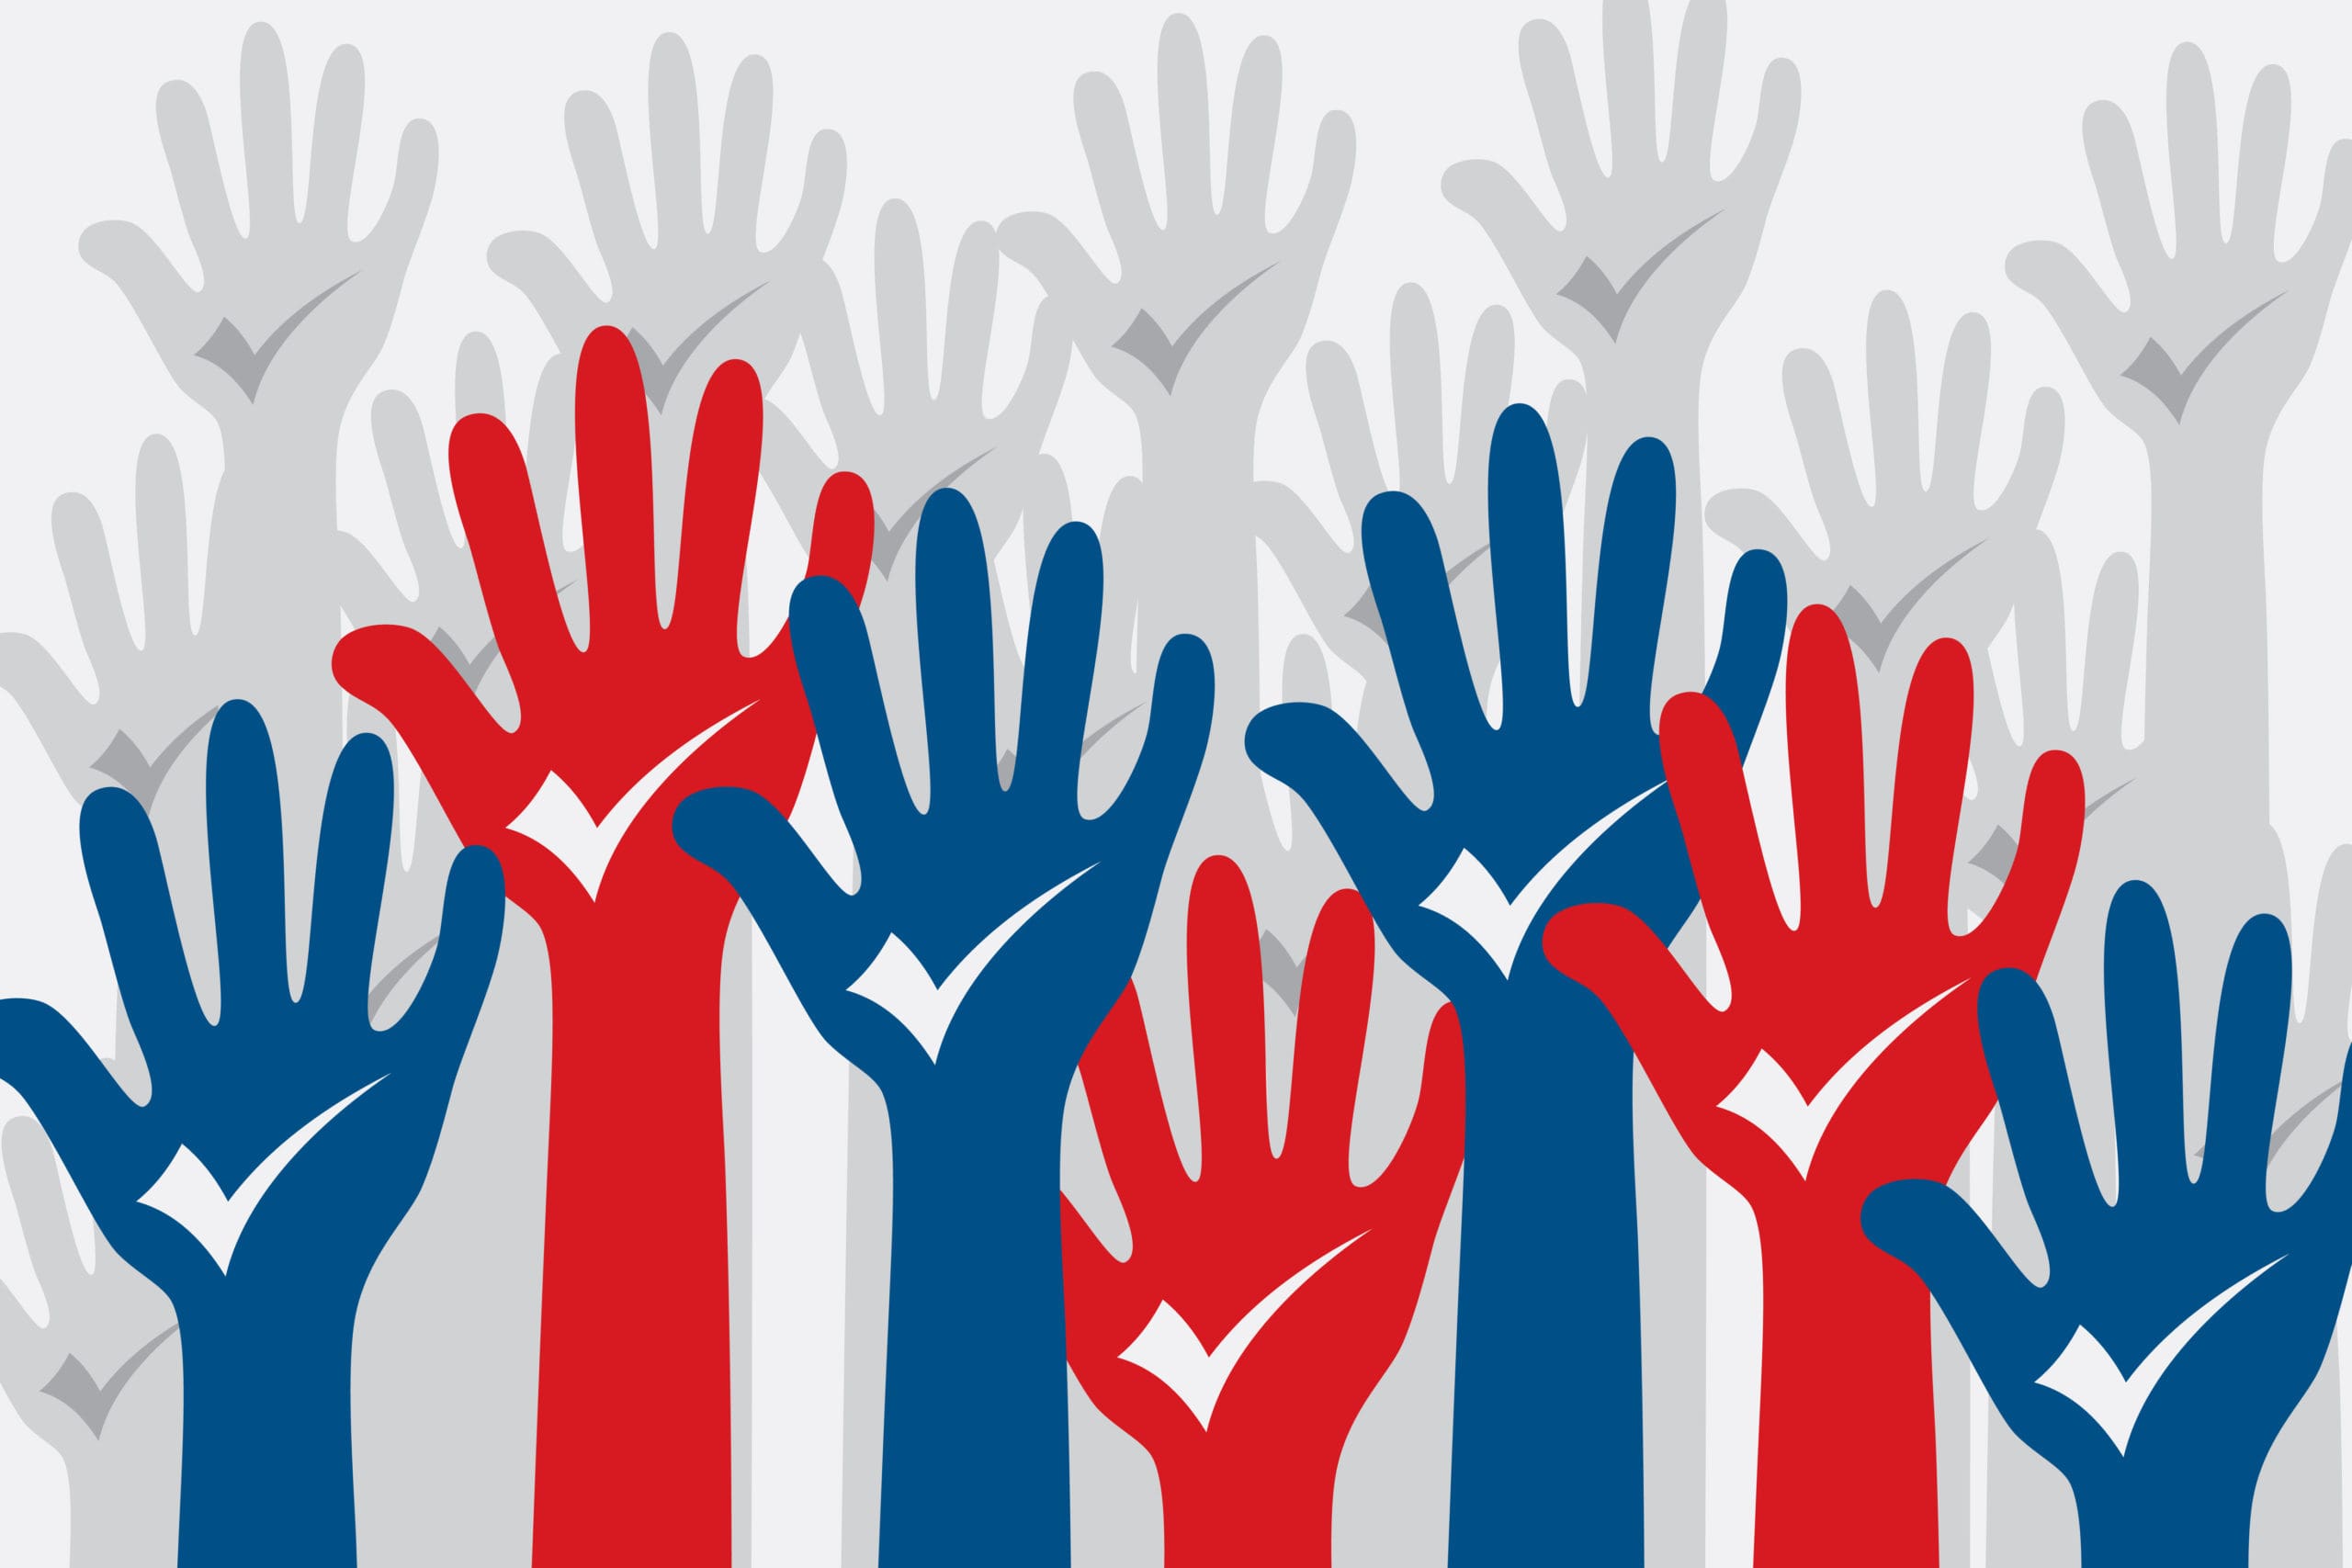 A graphic image showing a multitude of raised hands in shades of red, white, and gray, symbolizing unity, diversity, or a call to participation.